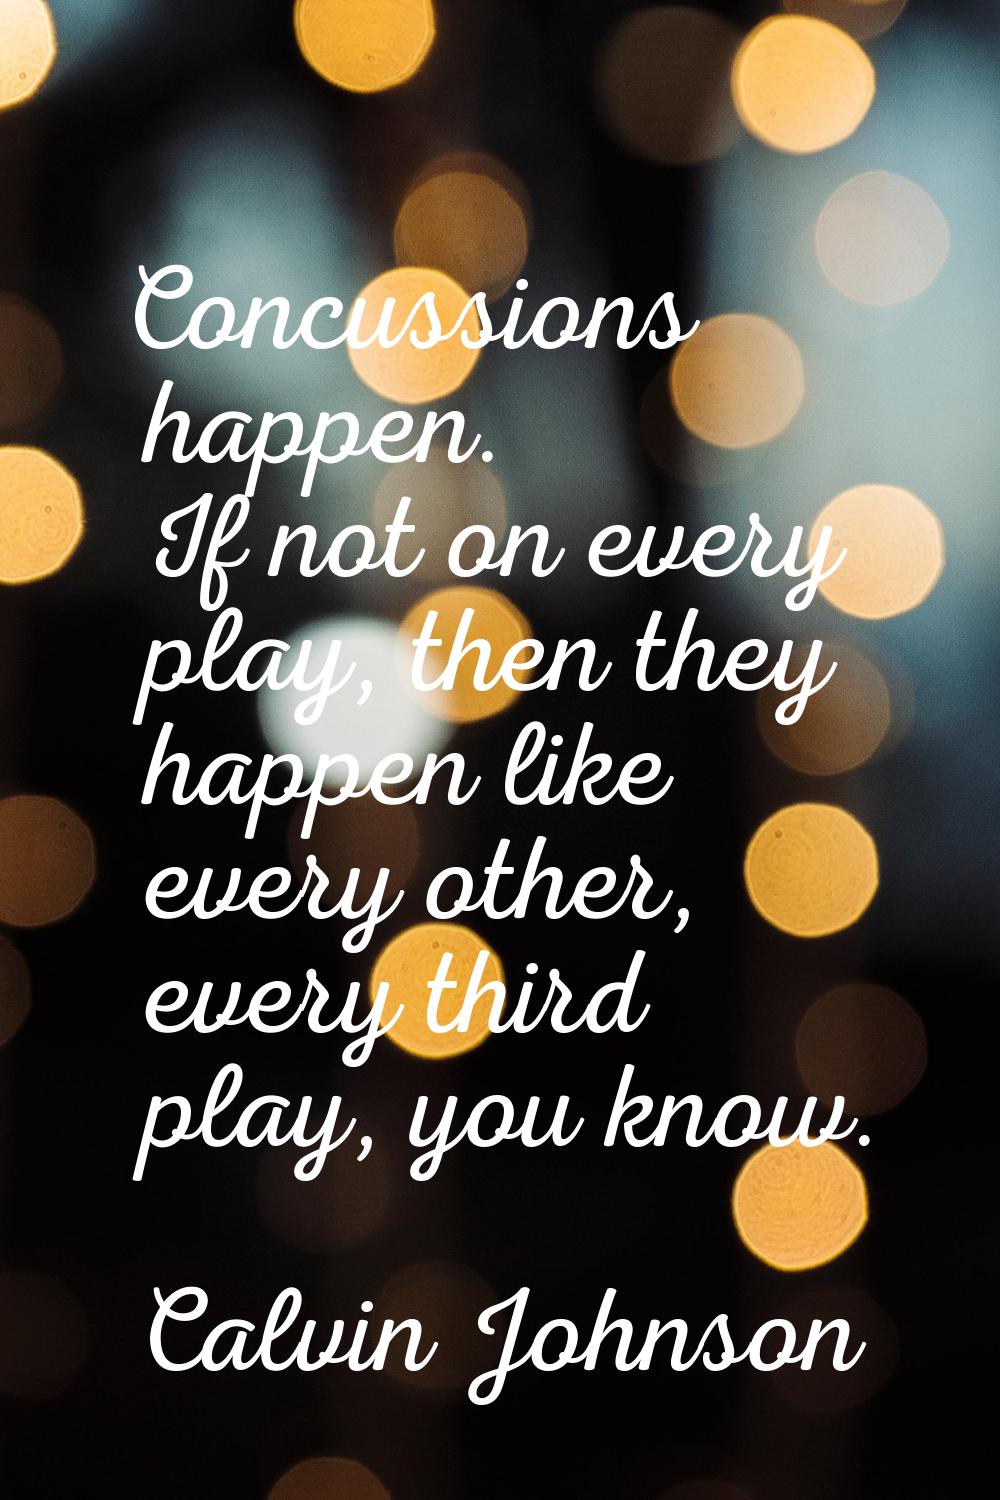 Concussions happen. If not on every play, then they happen like every other, every third play, you 